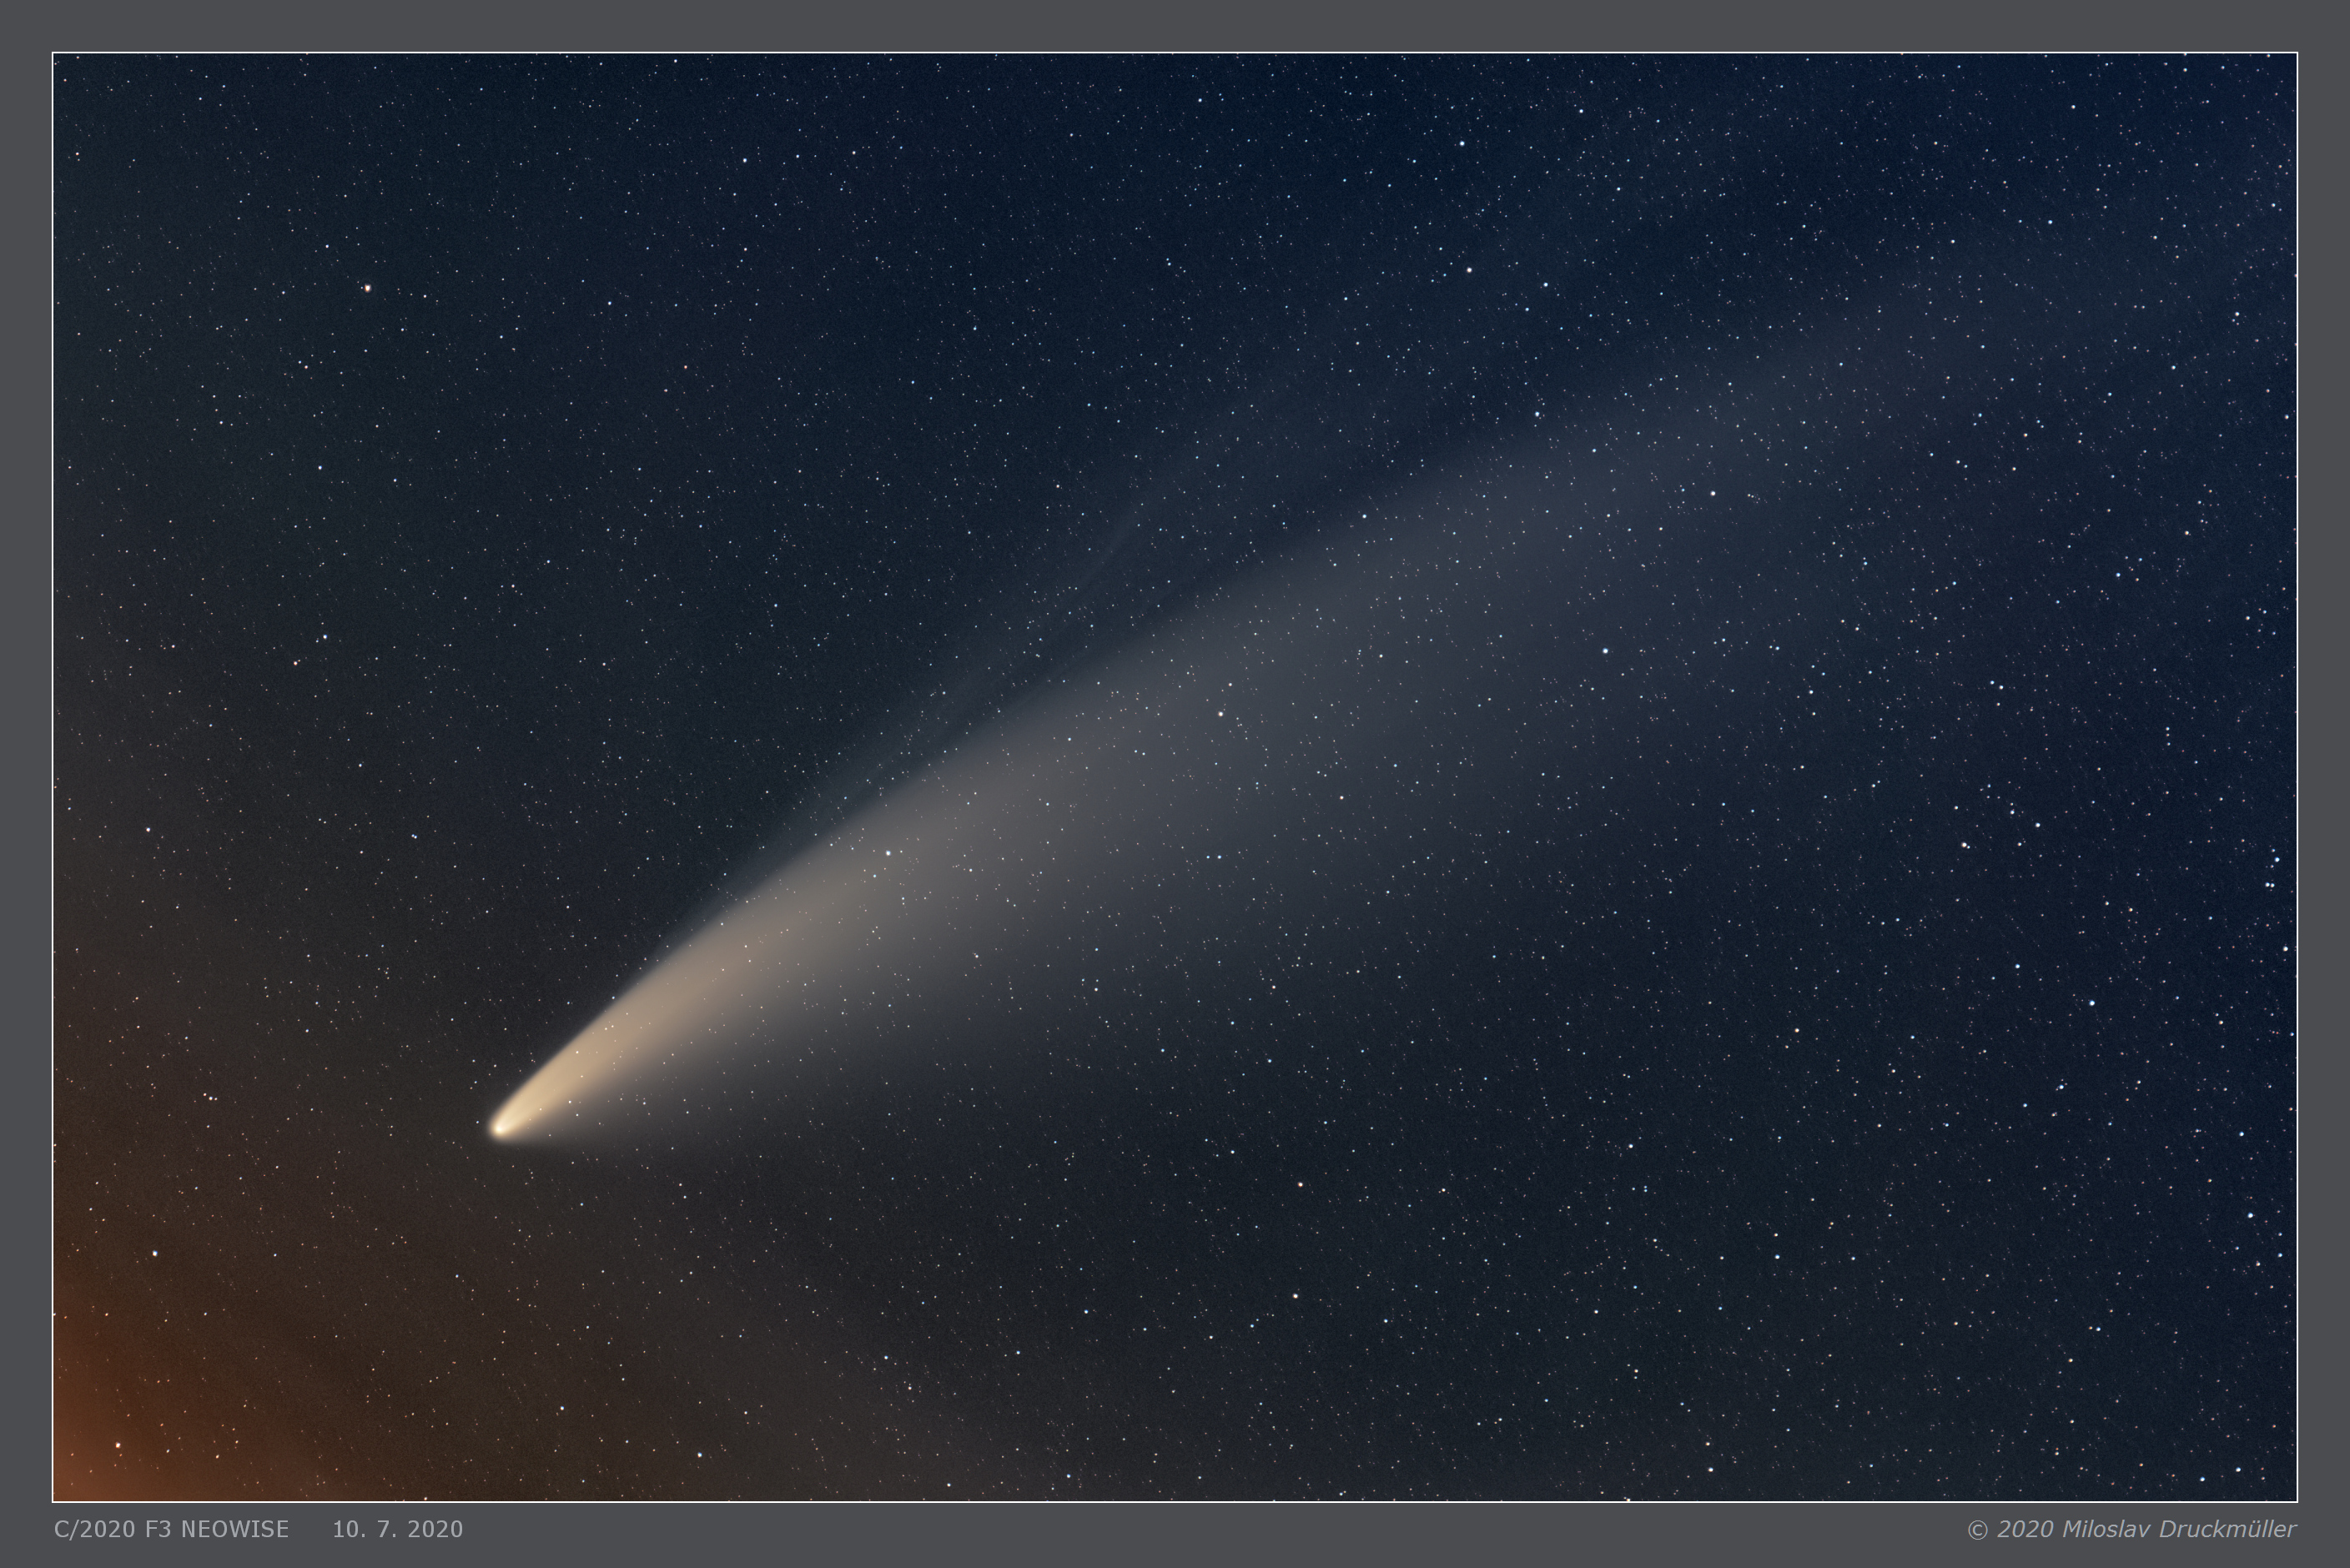 Apod 2020 July 11 The Tails Of Comet Neowise